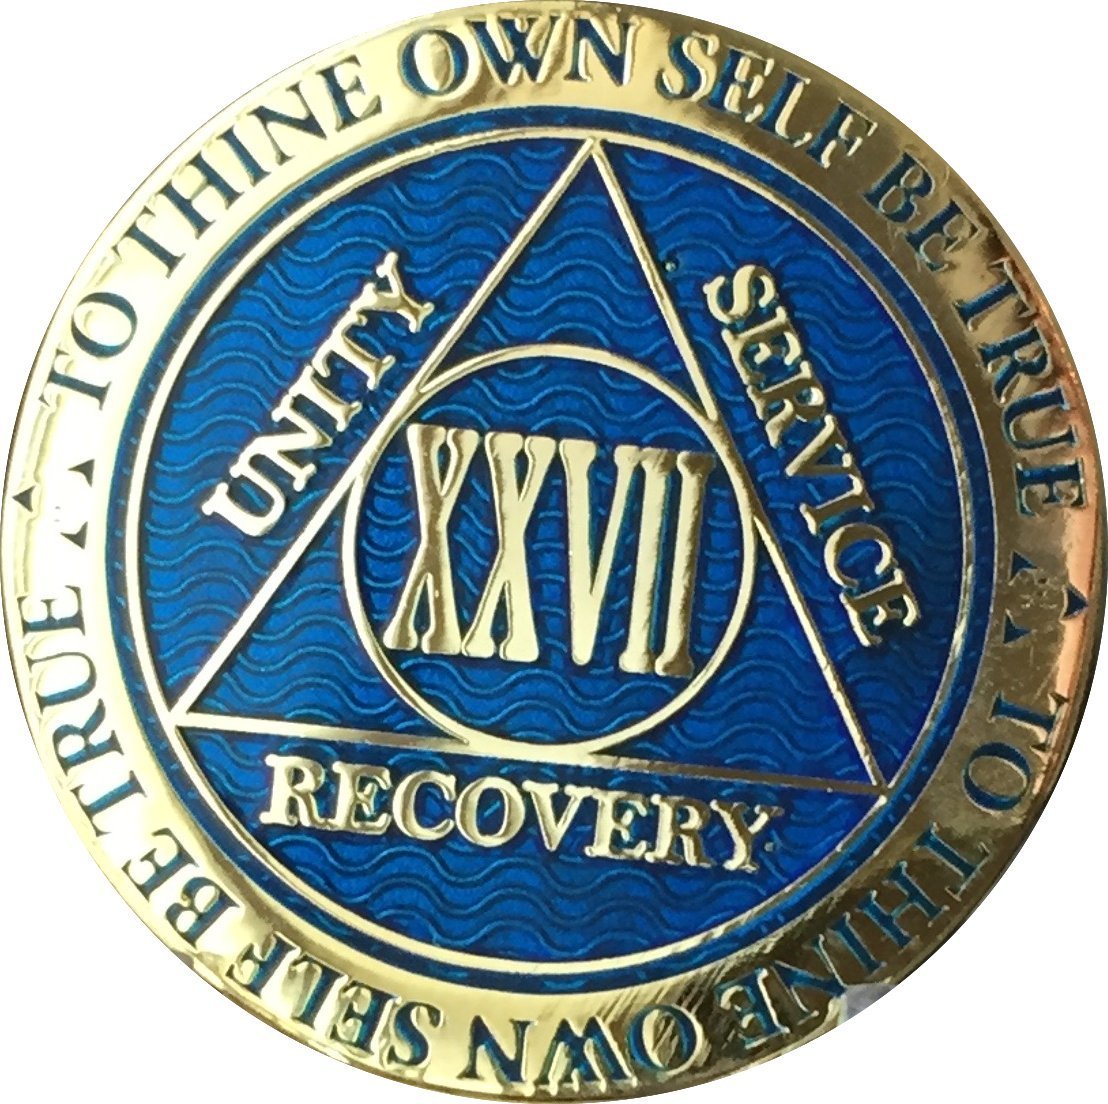 27 Year Reflex Blue Gold Plated AA Medallion Alcoholics Anonymous Chip